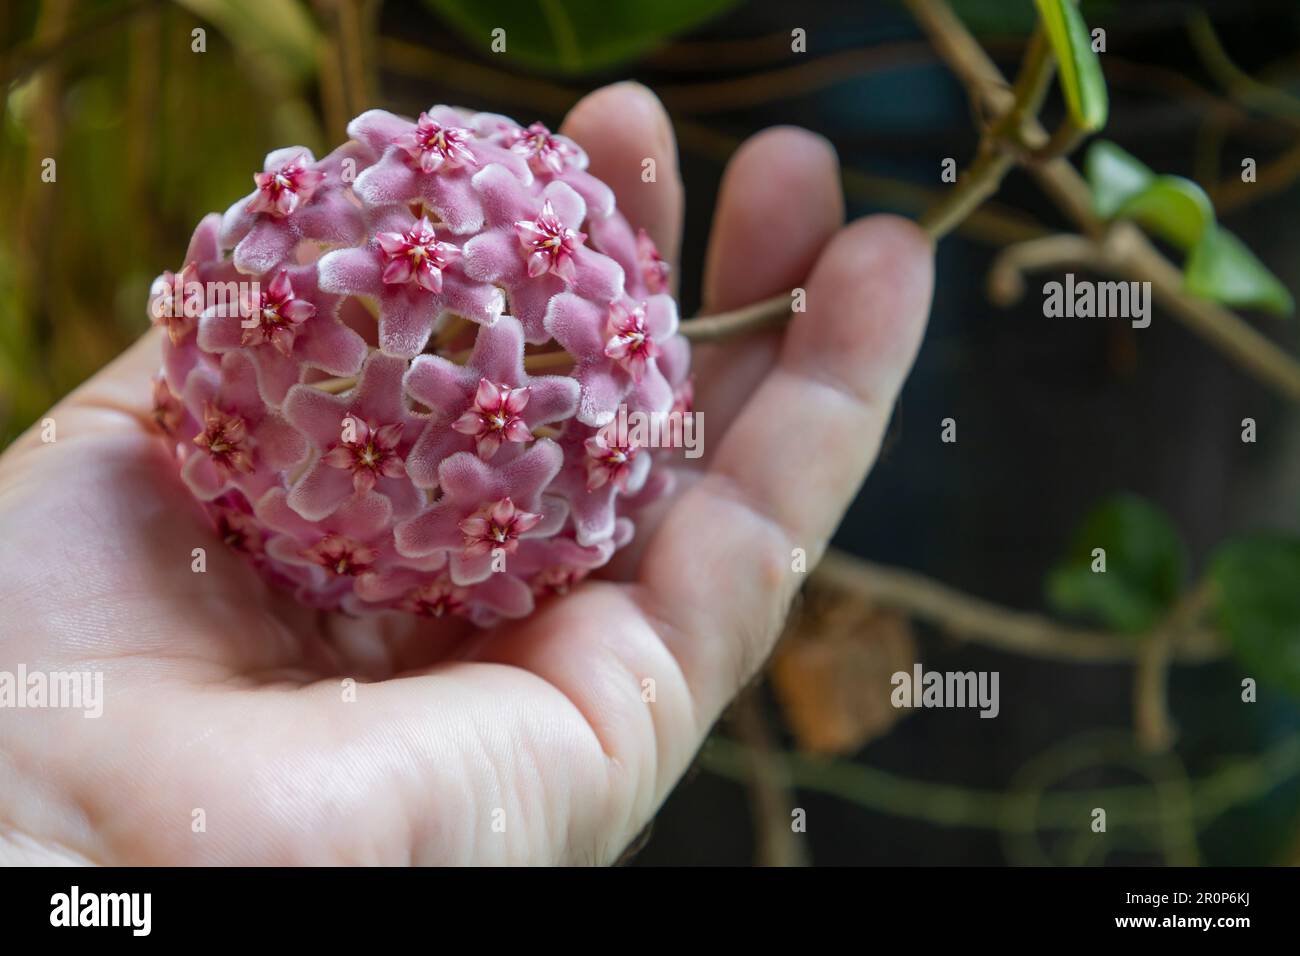 Hoya carnosa flowers. Porcelain flower or wax plant. pink blooming flowers ball on hand Stock Photo